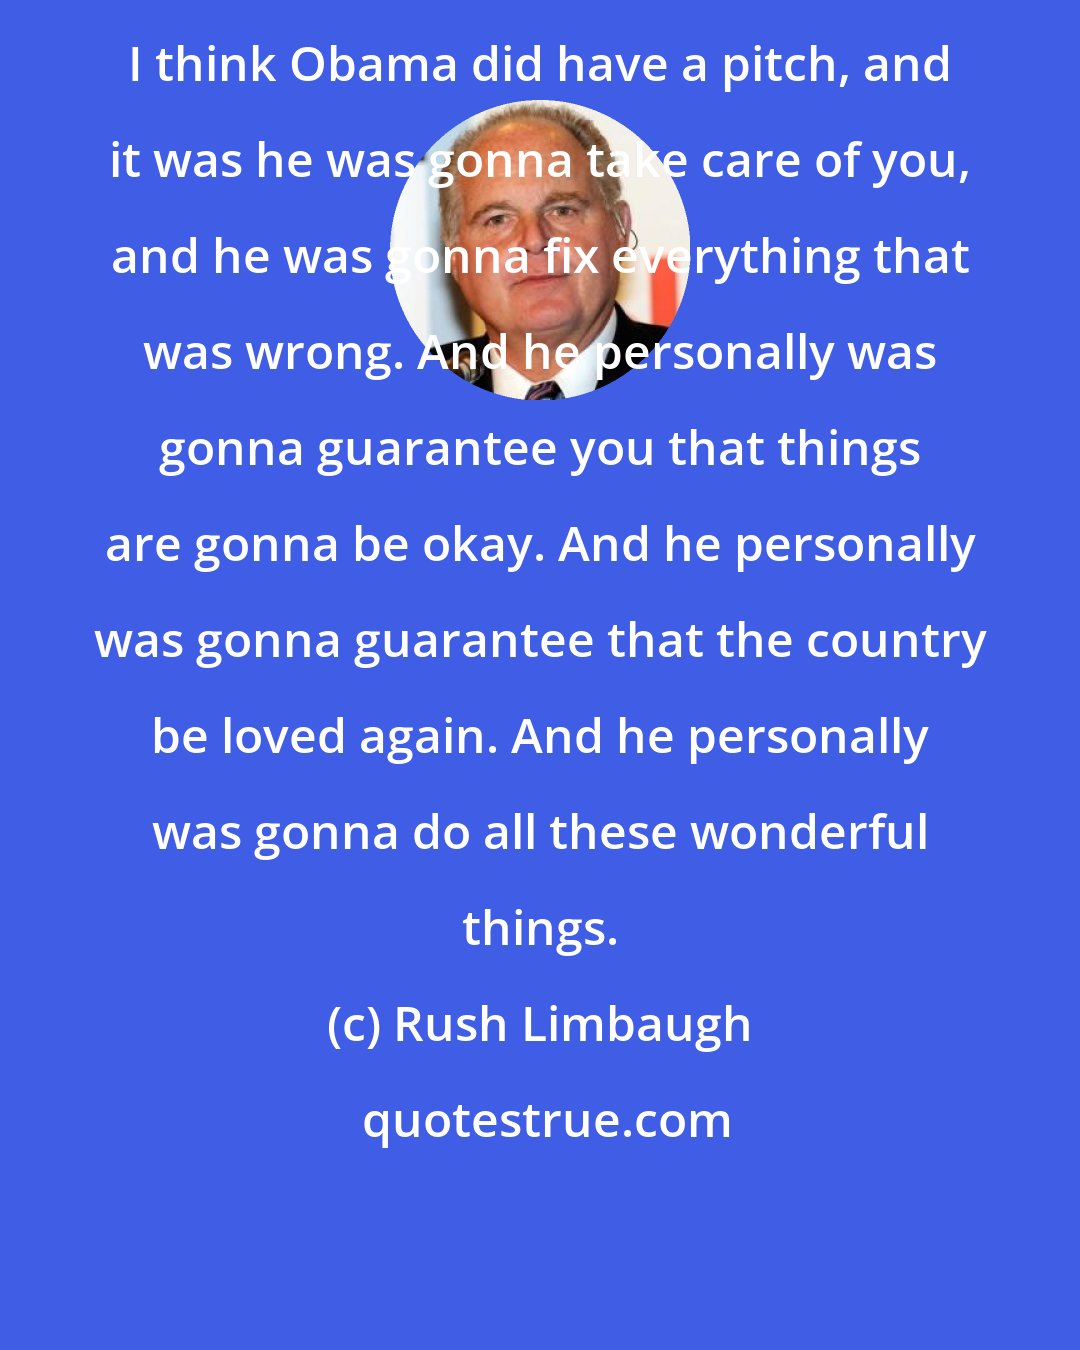 Rush Limbaugh: I think Obama did have a pitch, and it was he was gonna take care of you, and he was gonna fix everything that was wrong. And he personally was gonna guarantee you that things are gonna be okay. And he personally was gonna guarantee that the country be loved again. And he personally was gonna do all these wonderful things.